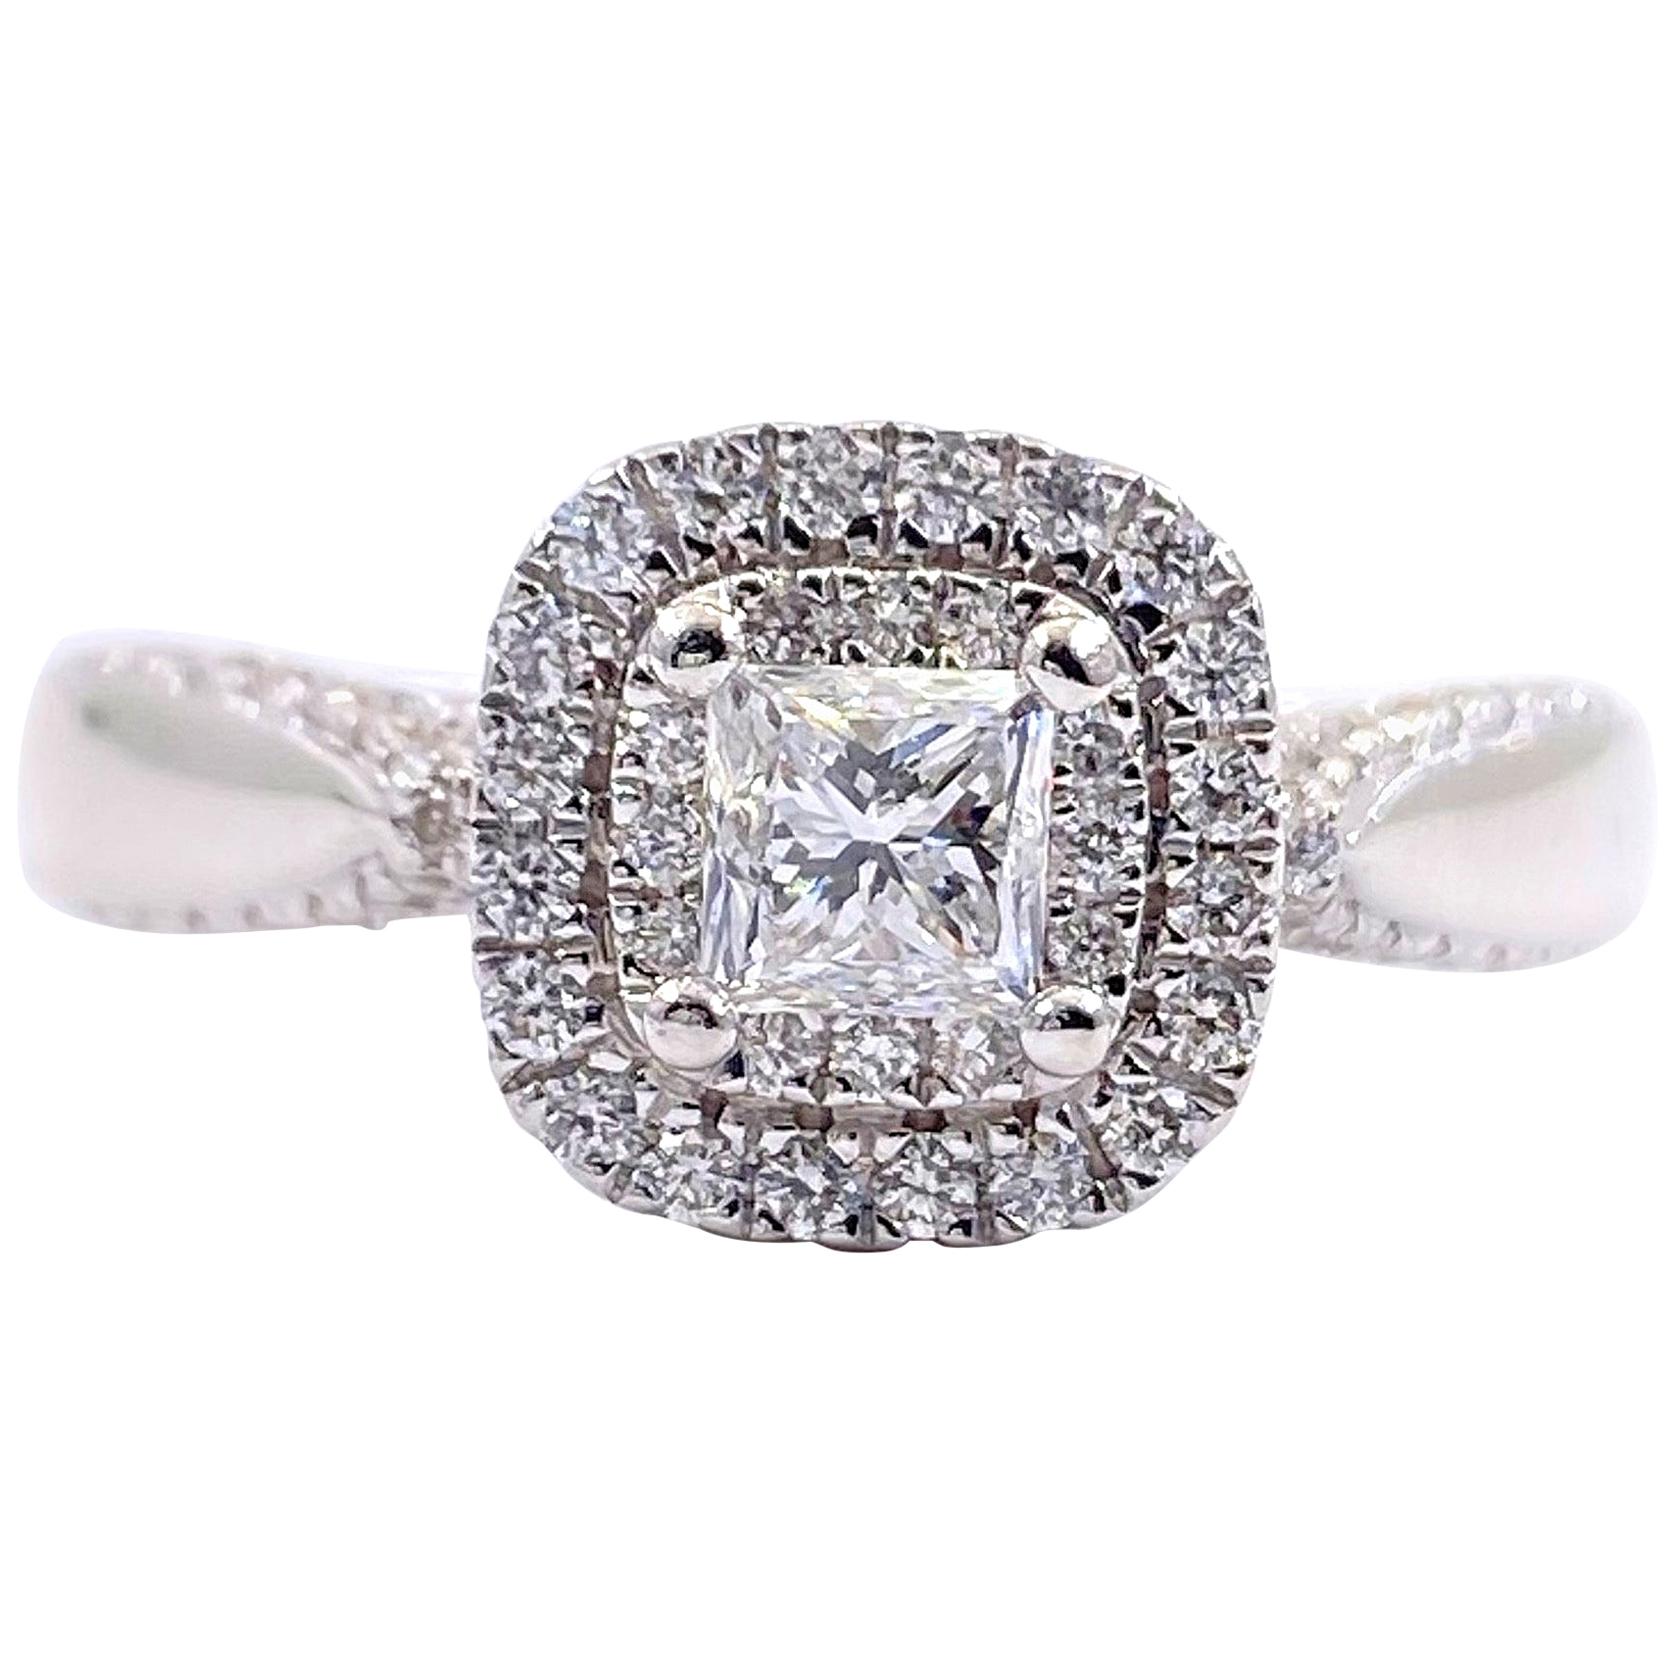 Vera Wang Love Collection Engagement Ring
Style:  Double Halo 
Ref. number: #20053709
Metal:  14kt White Gold
Size / Measurements:  5.5 - sizable
TCW:  7/8 or 0.80 tcw
Main Diamond:  Princess-Cut Diamond 0.45 cts
Color & Clarity:  I / I1
Accent